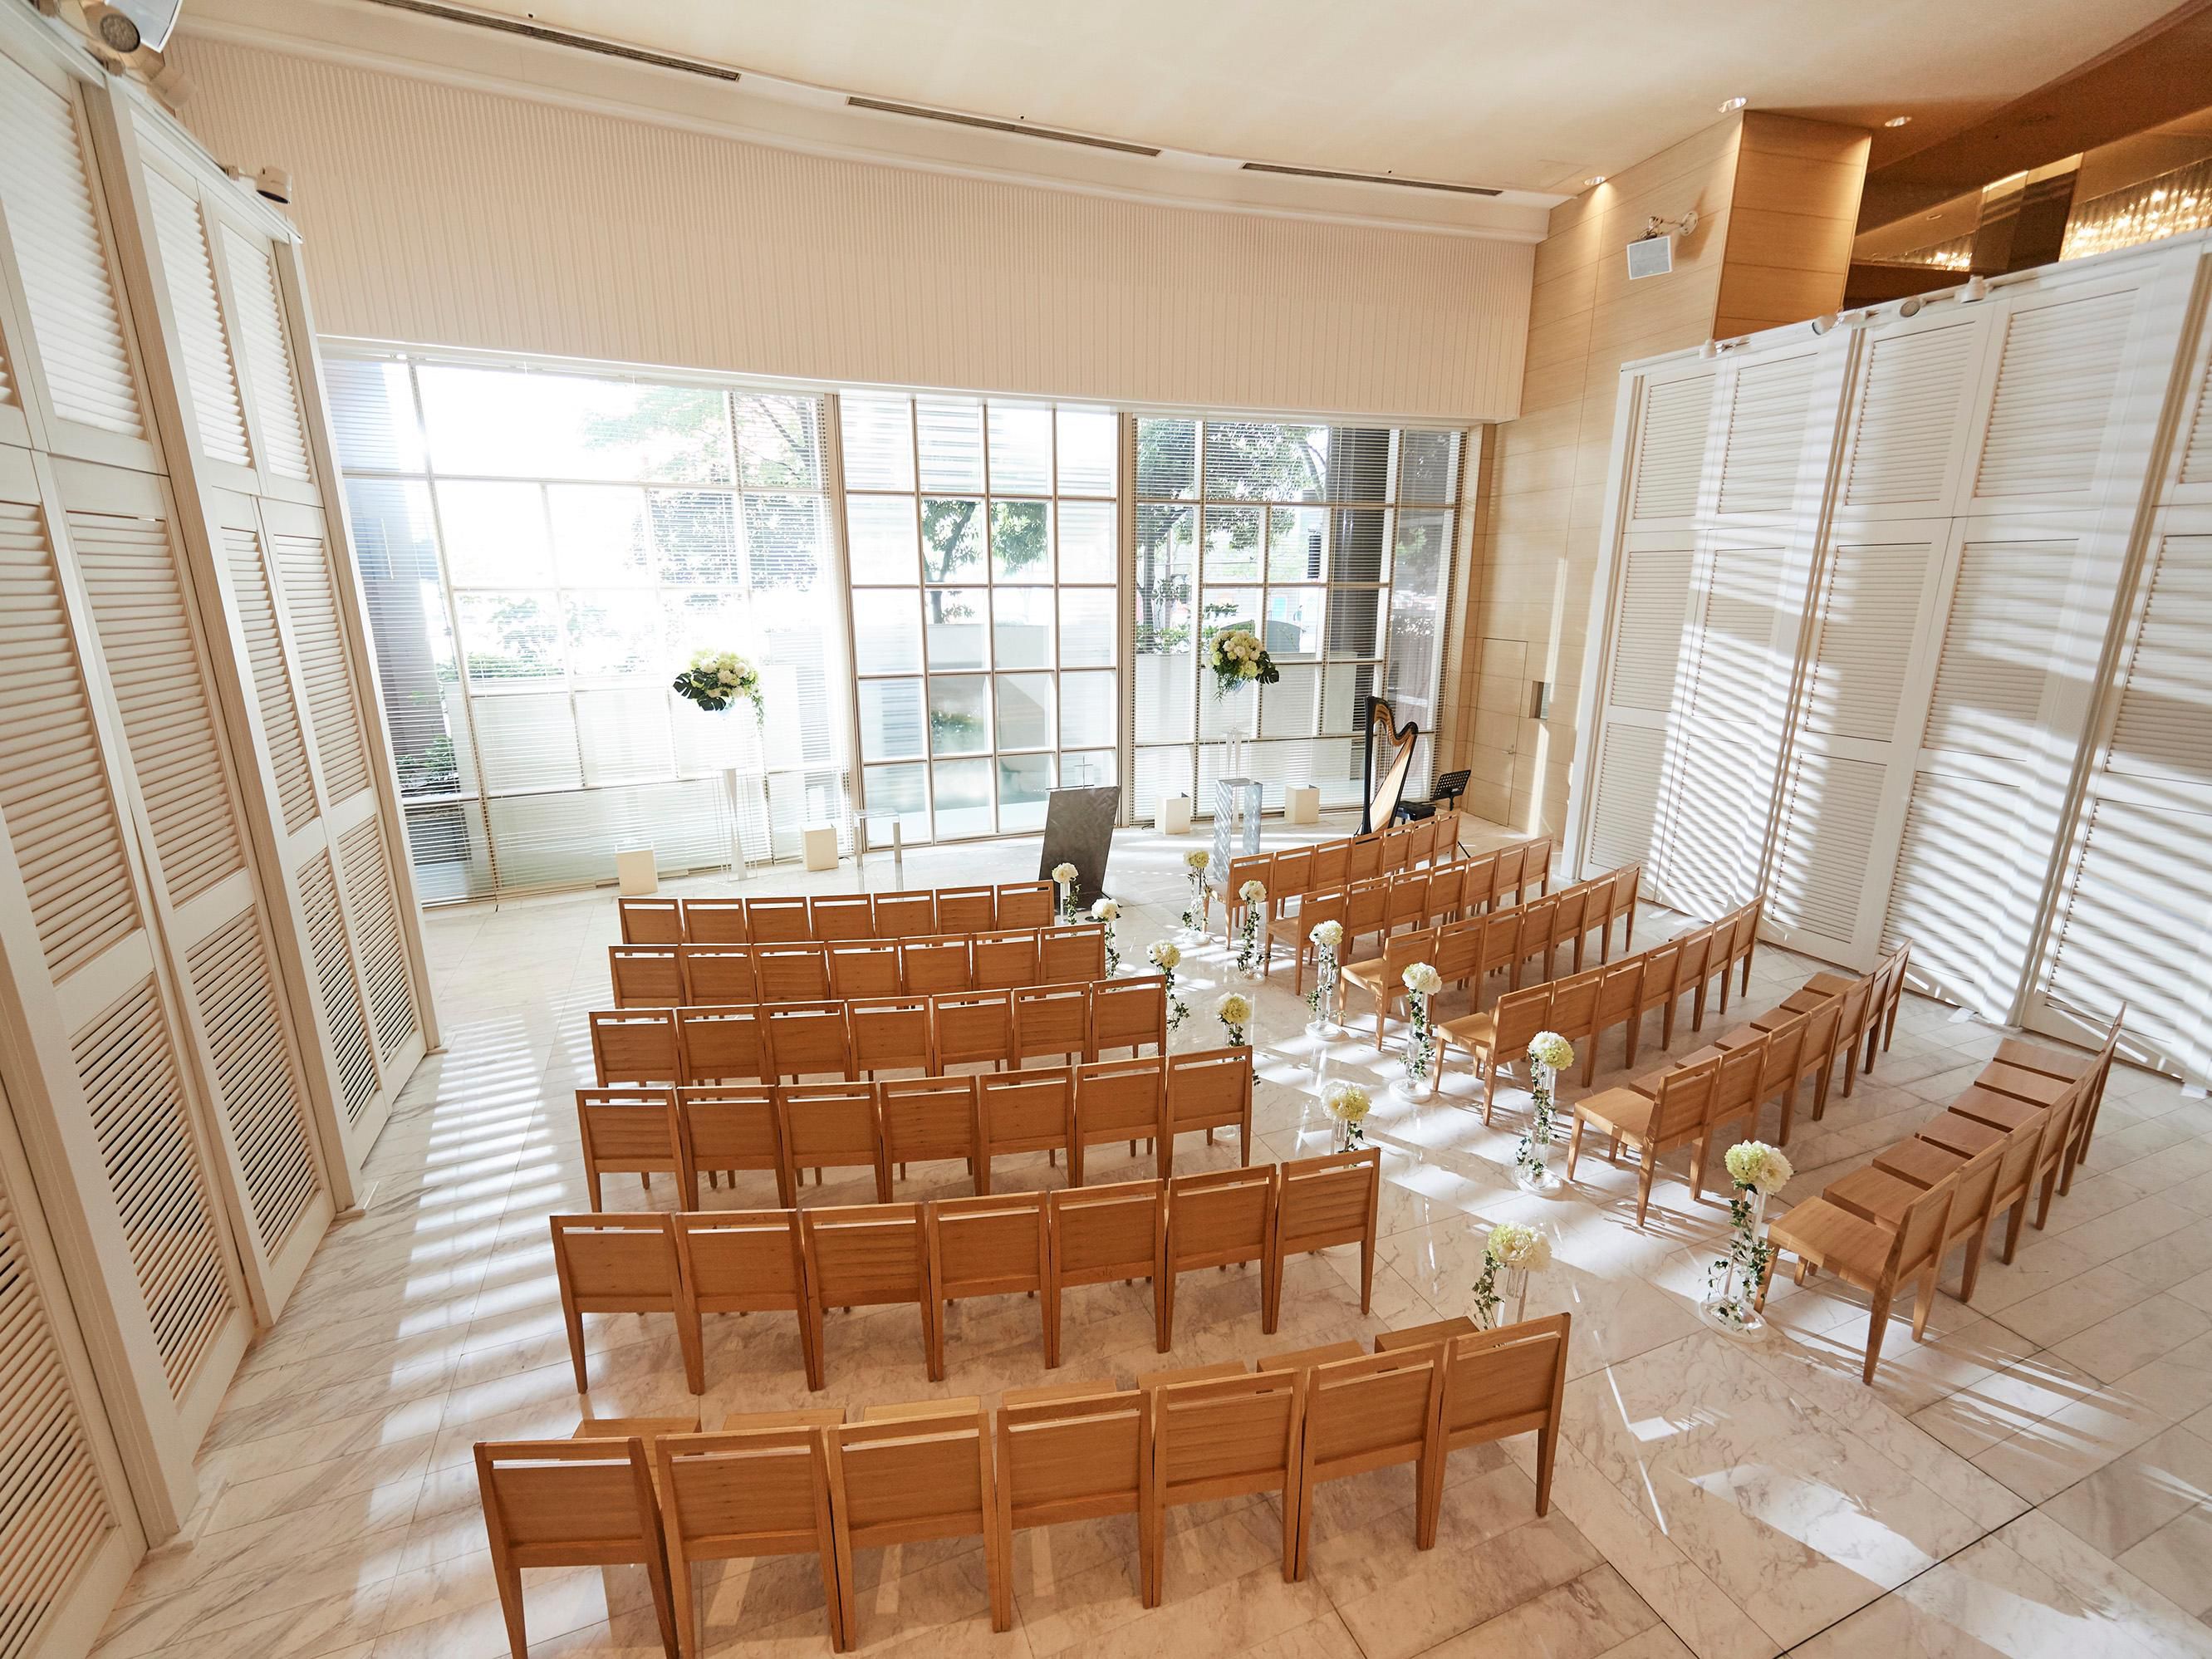 Ana Crowne Plaza Kanazawa is located just in front of Kanazawa station. You can welcome your guests with this favorable location. 
We have a chapel ''the stage AQUA'' and a shrine ''Houmeiden'' for wedding ceremonies. And also, we have various rooms for wedding receptions to suit your wedding style.